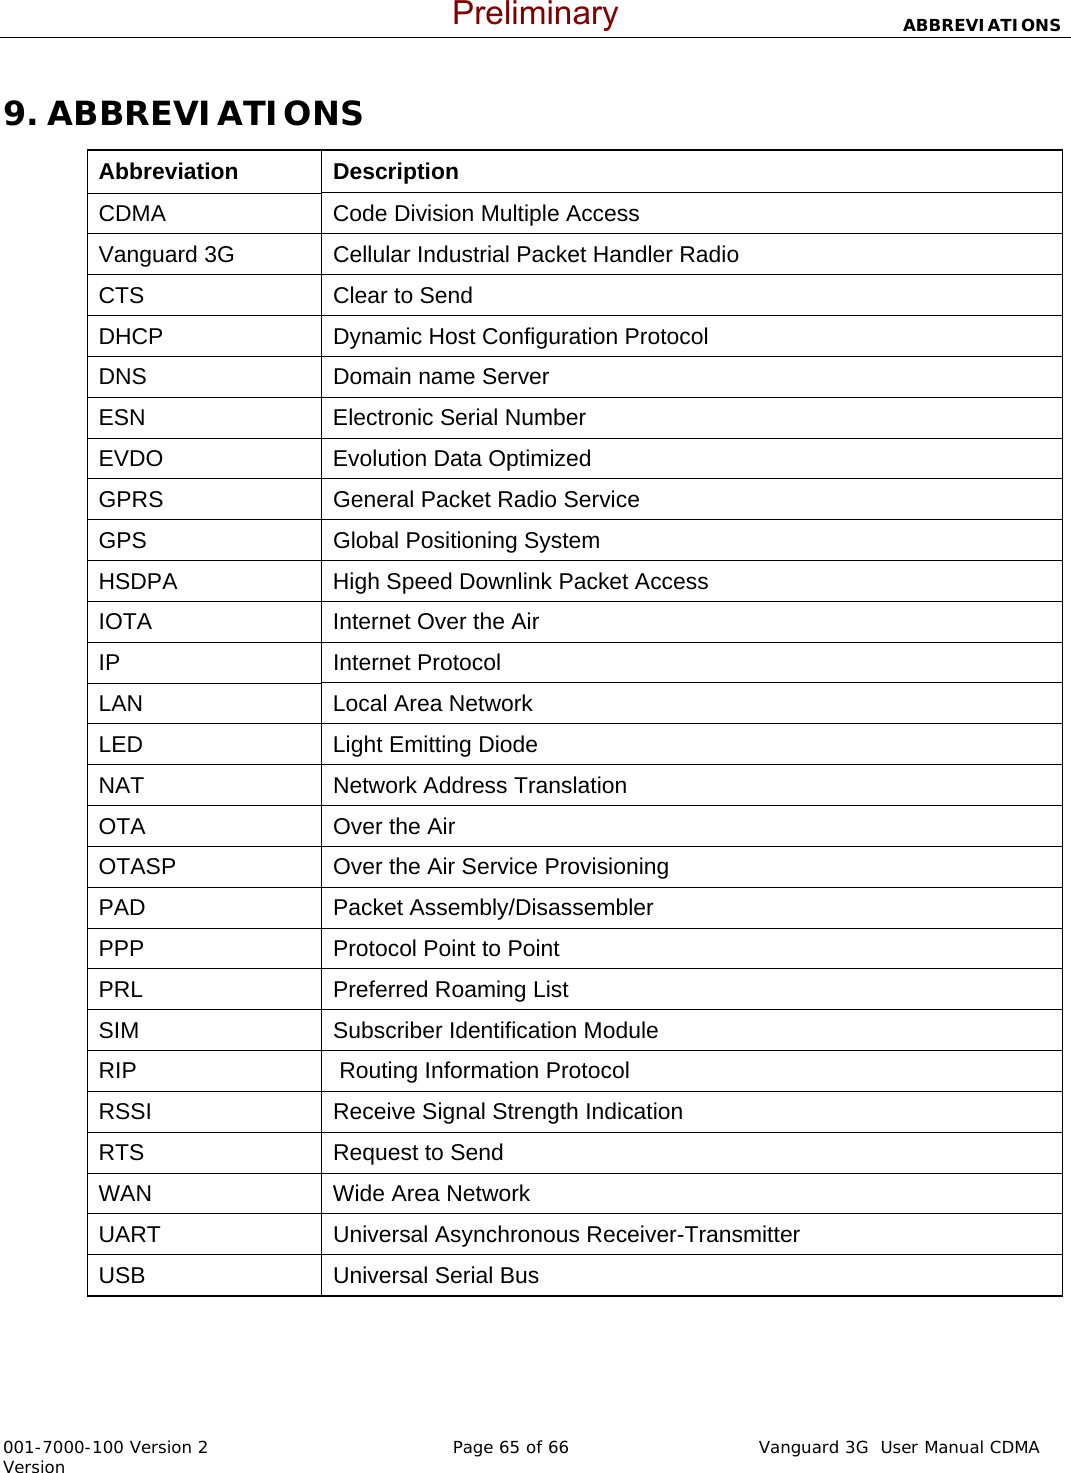                            ABBREVIATIONS  001-7000-100 Version 2       Page 65 of 66       Vanguard 3G  User Manual CDMA Version 9. ABBREVIATIONS Abbreviation  Description  CDMA  Code Division Multiple Access Vanguard 3G   Cellular Industrial Packet Handler Radio CTS   Clear to Send  DHCP  Dynamic Host Configuration Protocol DNS  Domain name Server ESN  Electronic Serial Number EVDO  Evolution Data Optimized GPRS   General Packet Radio Service  GPS  Global Positioning System HSDPA  High Speed Downlink Packet Access IOTA  Internet Over the Air IP   Internet Protocol  LAN Local Area Network LED  Light Emitting Diode NAT  Network Address Translation OTA  Over the Air OTASP  Over the Air Service Provisioning PAD Packet Assembly/Disassembler PPP  Protocol Point to Point PRL  Preferred Roaming List SIM   Subscriber Identification Module  RIP   Routing Information Protocol RSSI  Receive Signal Strength Indication RTS   Request to Send  WAN  Wide Area Network UART   Universal Asynchronous Receiver-Transmitter  USB   Universal Serial Bus  Preliminary